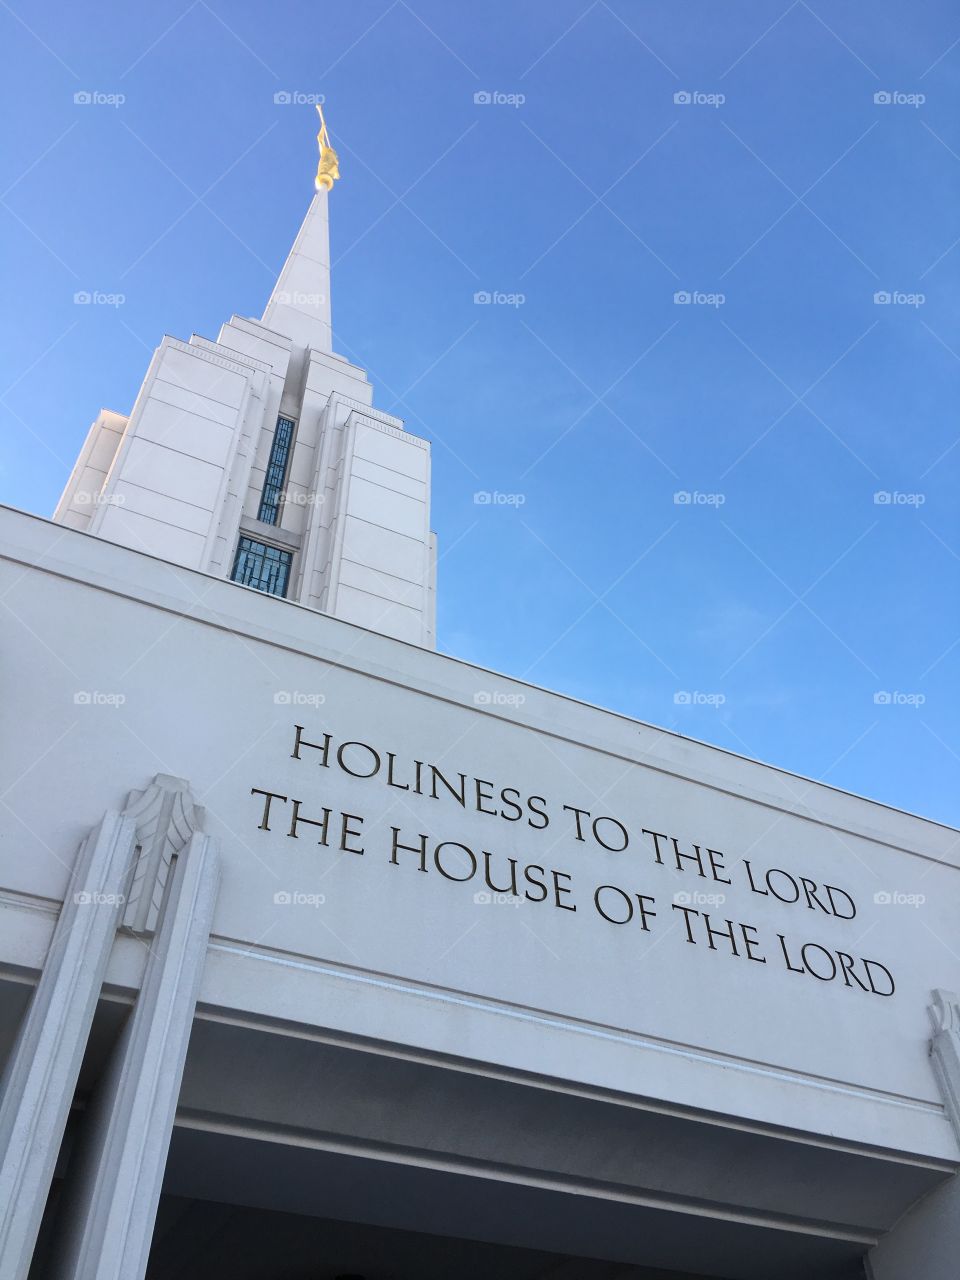 Holiness to the Lord. The house of the Lord.